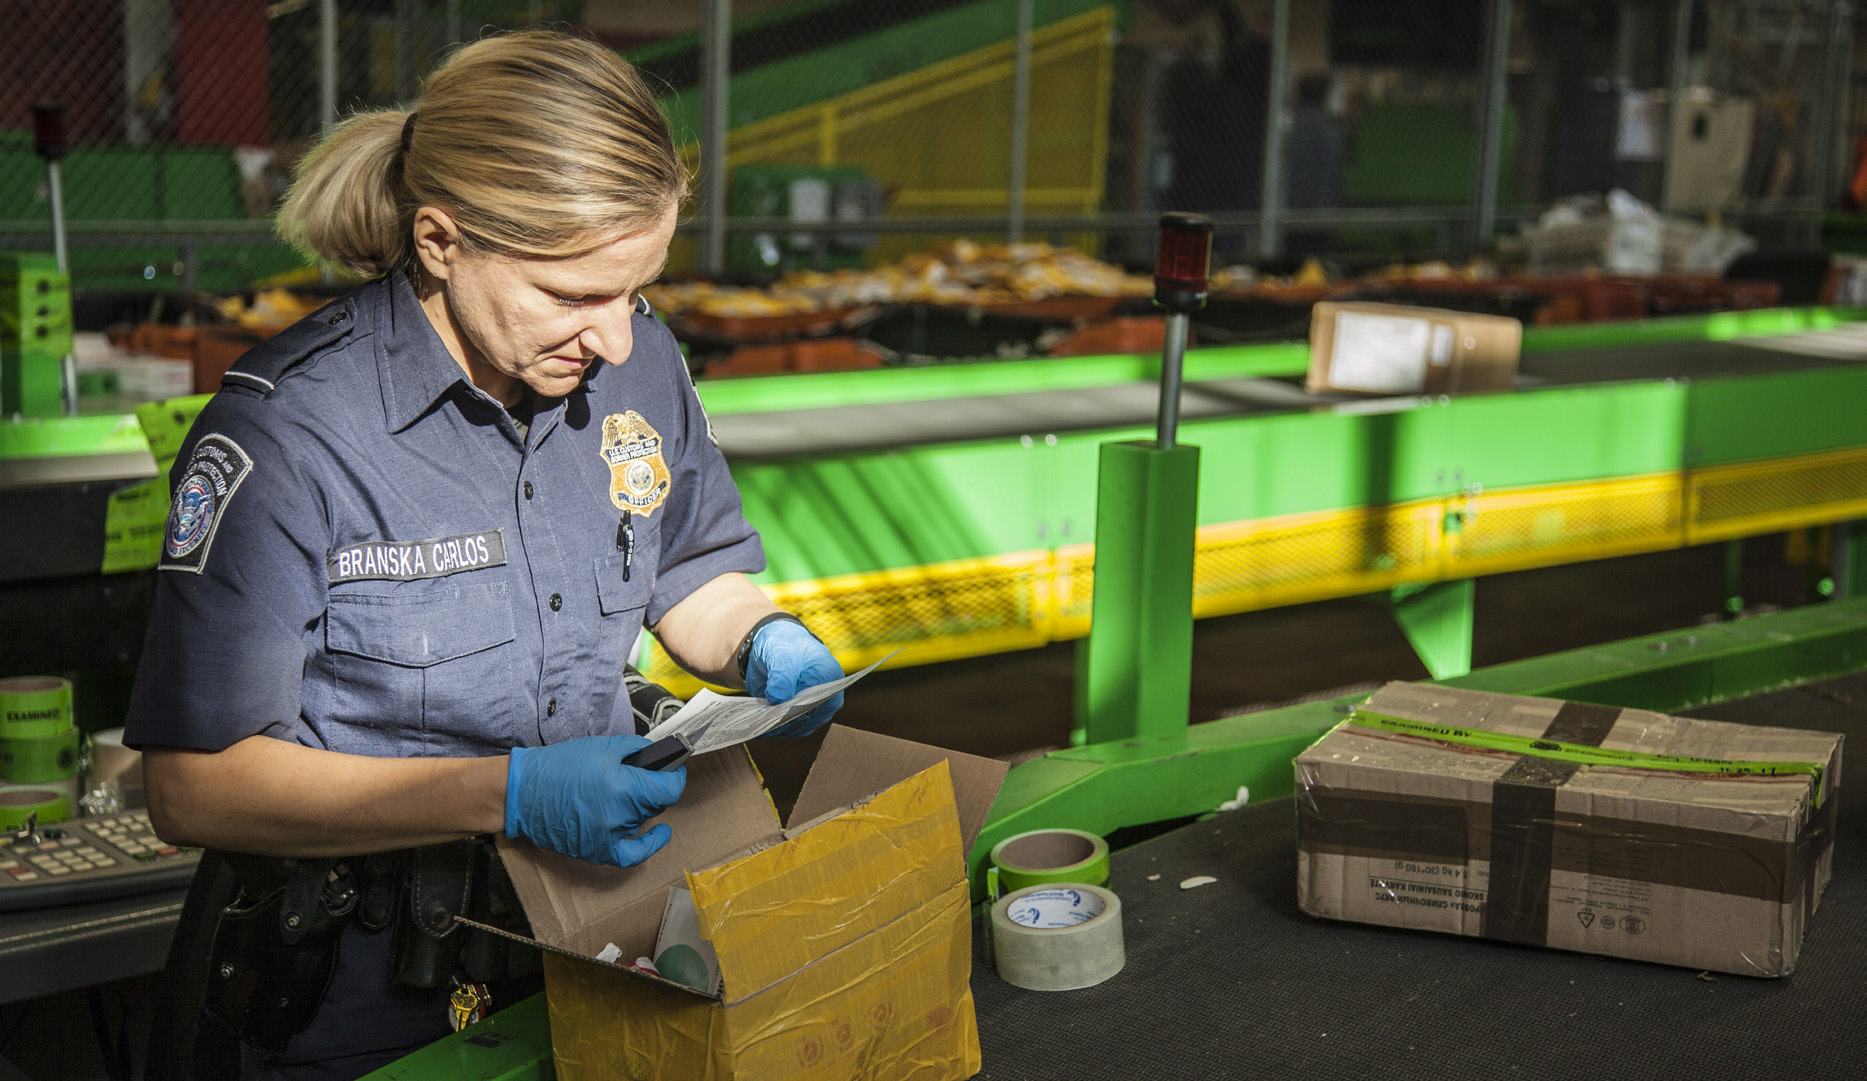 CBP Officer Monika Branska Carlos inspects a package with possible illegal narcotics.